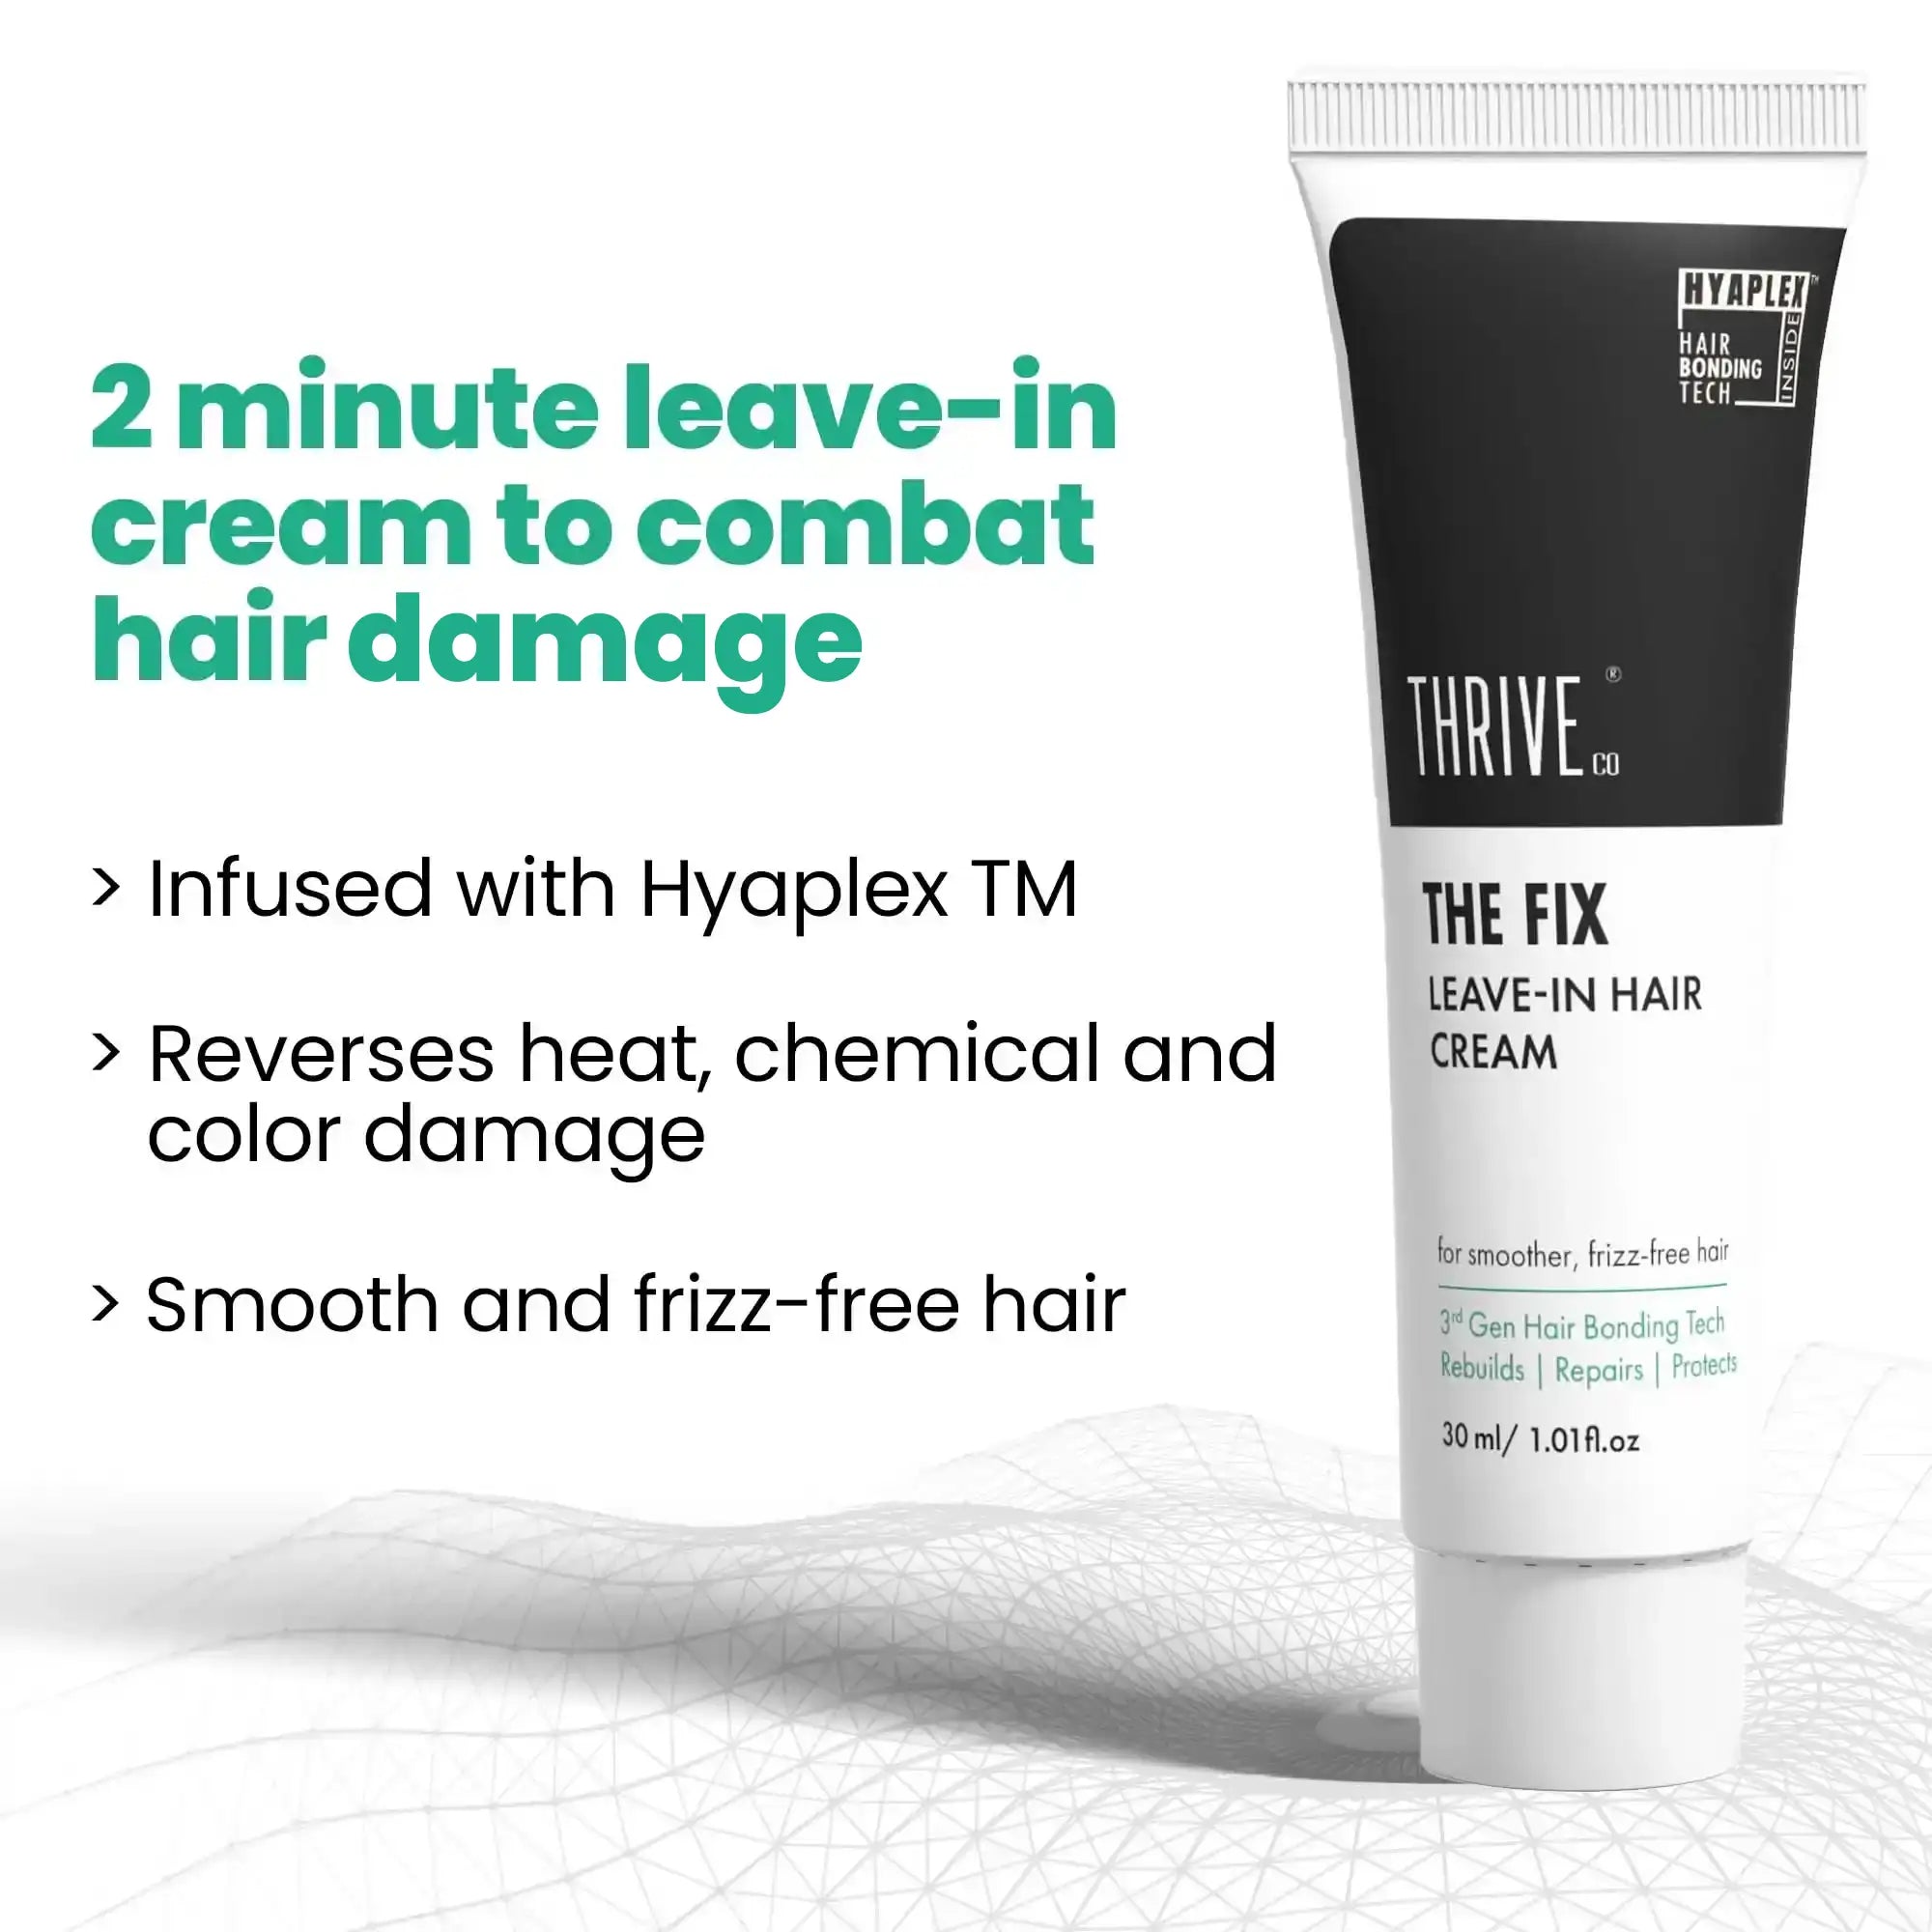 thriveco the fix is a leave in cream for damaged hair